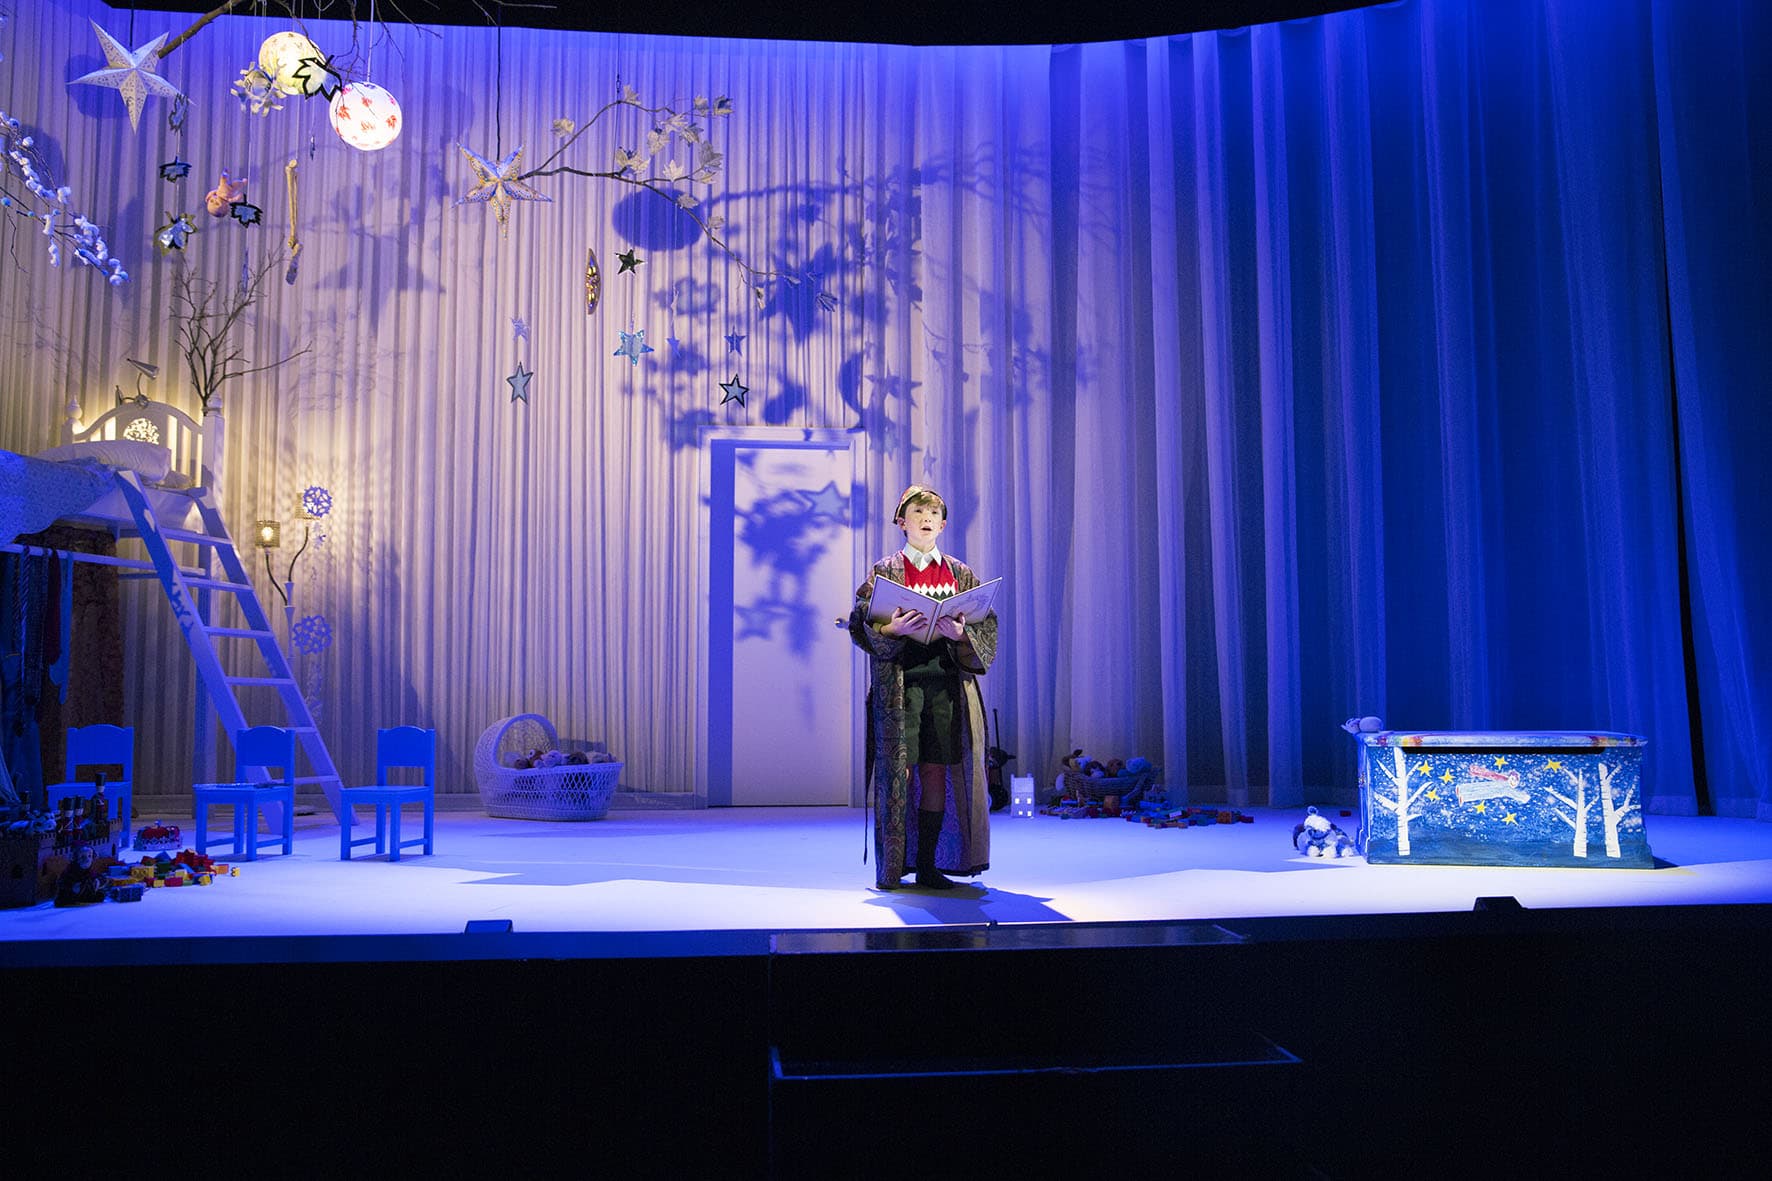 Rory Potter as Mamillius. Image by Michele Mossop.